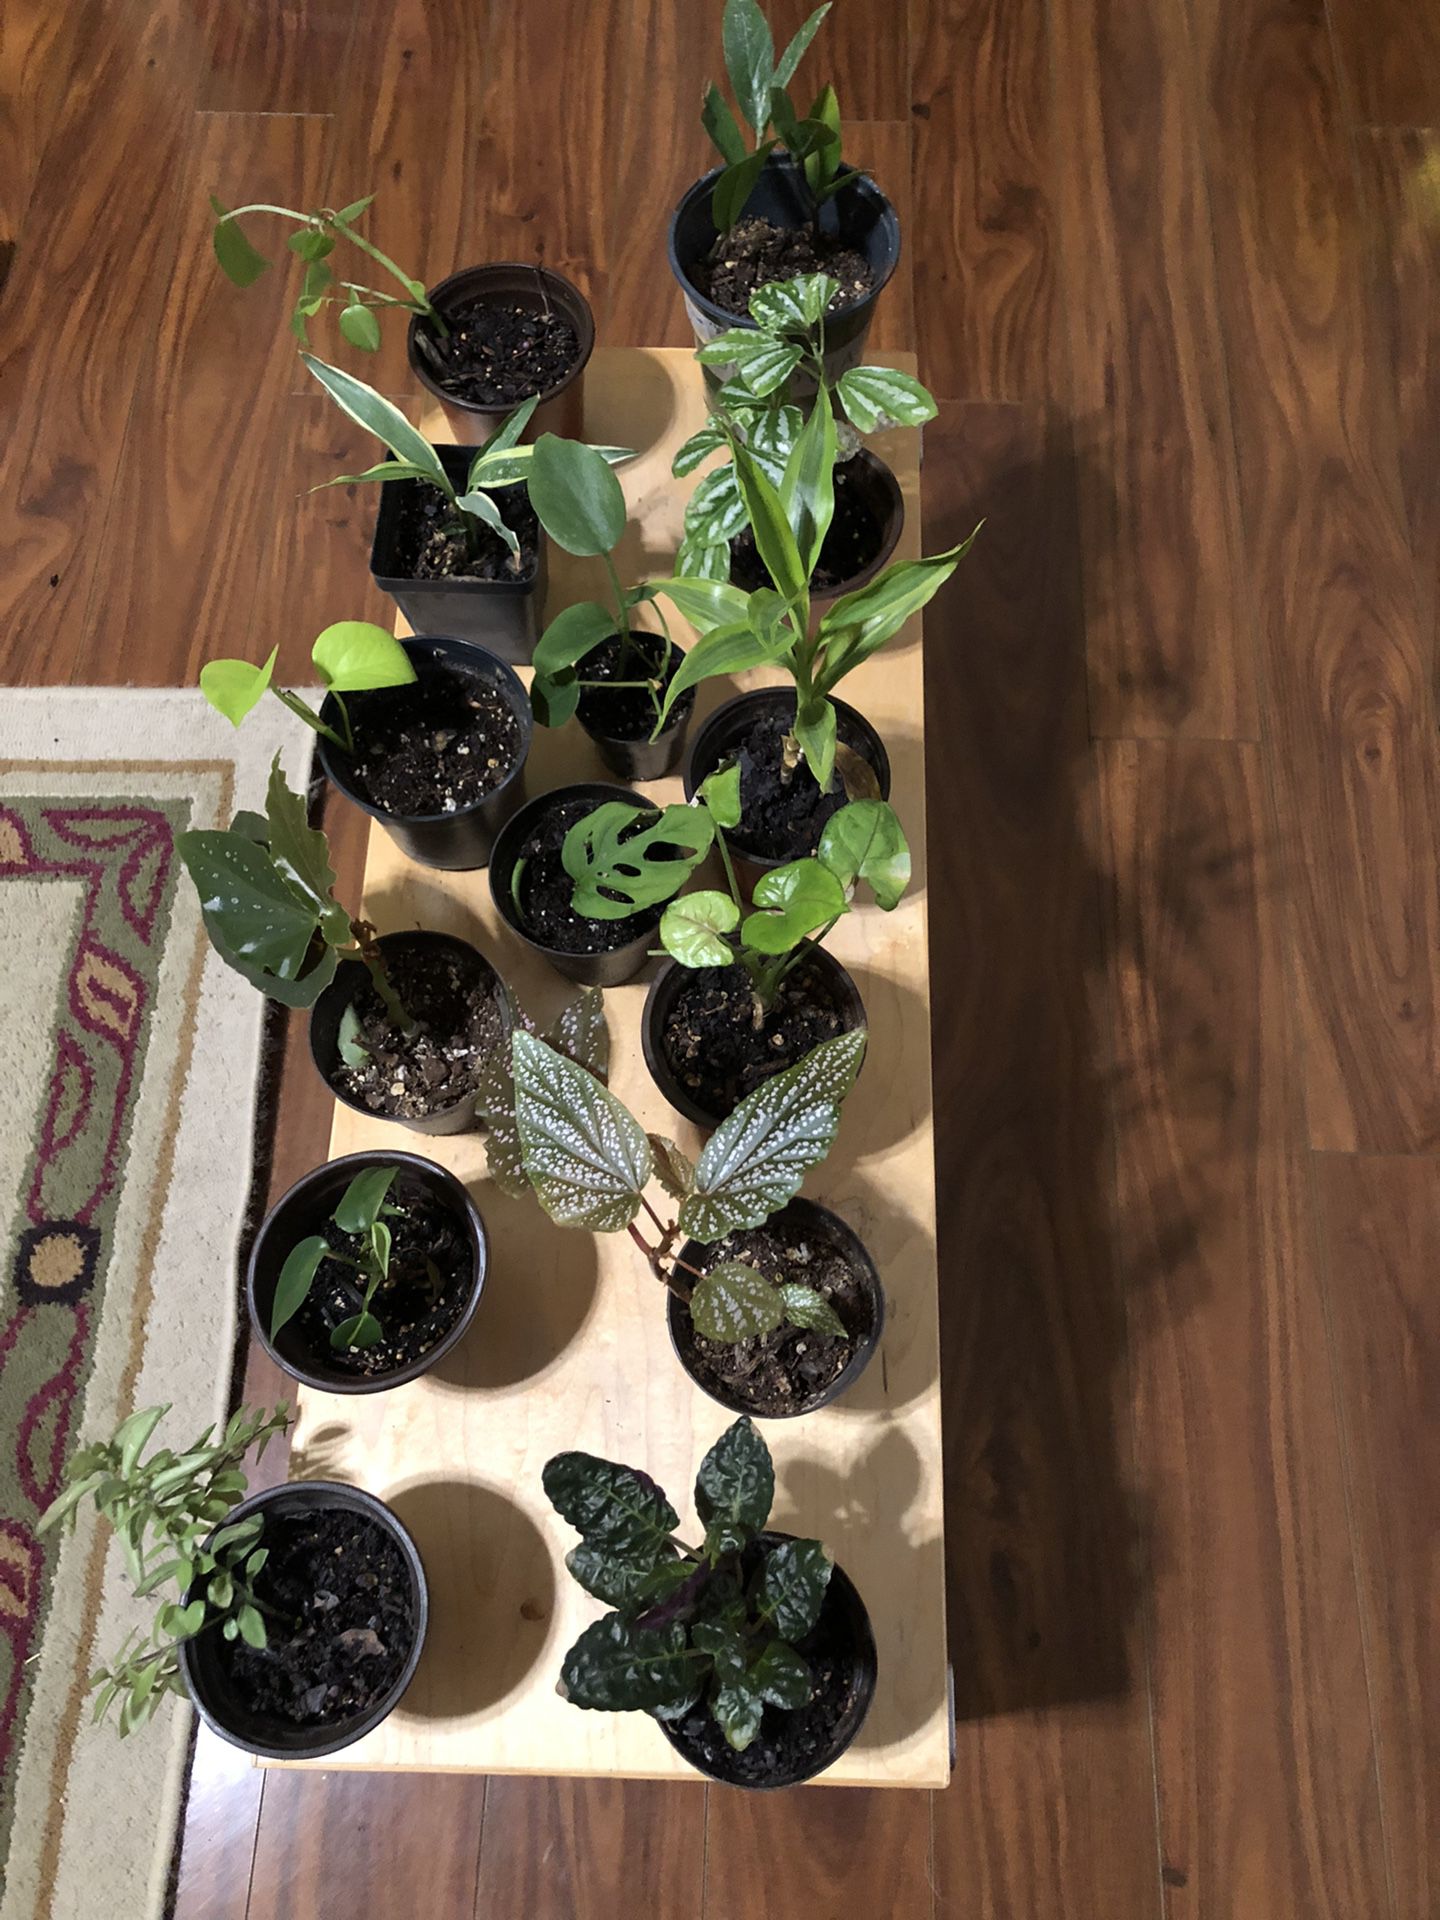  $3 Each Or Bundle For $40 - Total 15 Plants 